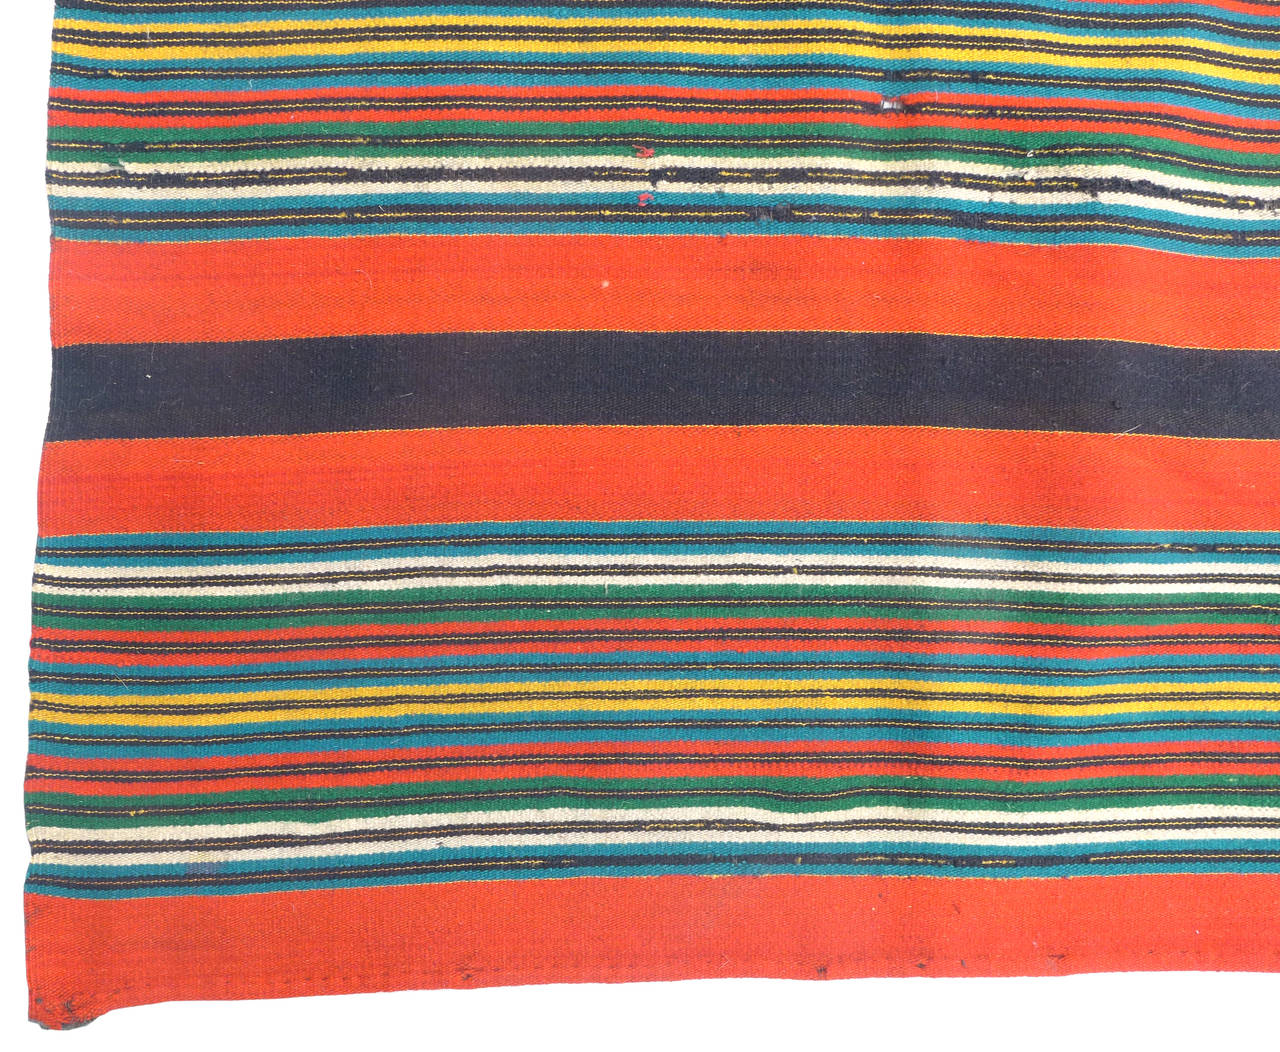 A striking, turn-of-the-century, Mexican, hand-woven textile.  A Saltillo-style weaving wearing a beautifully vibrant mix of color in a variegated, optic linear pattern.  At some point in it's life this piece was looped over at one end and gently